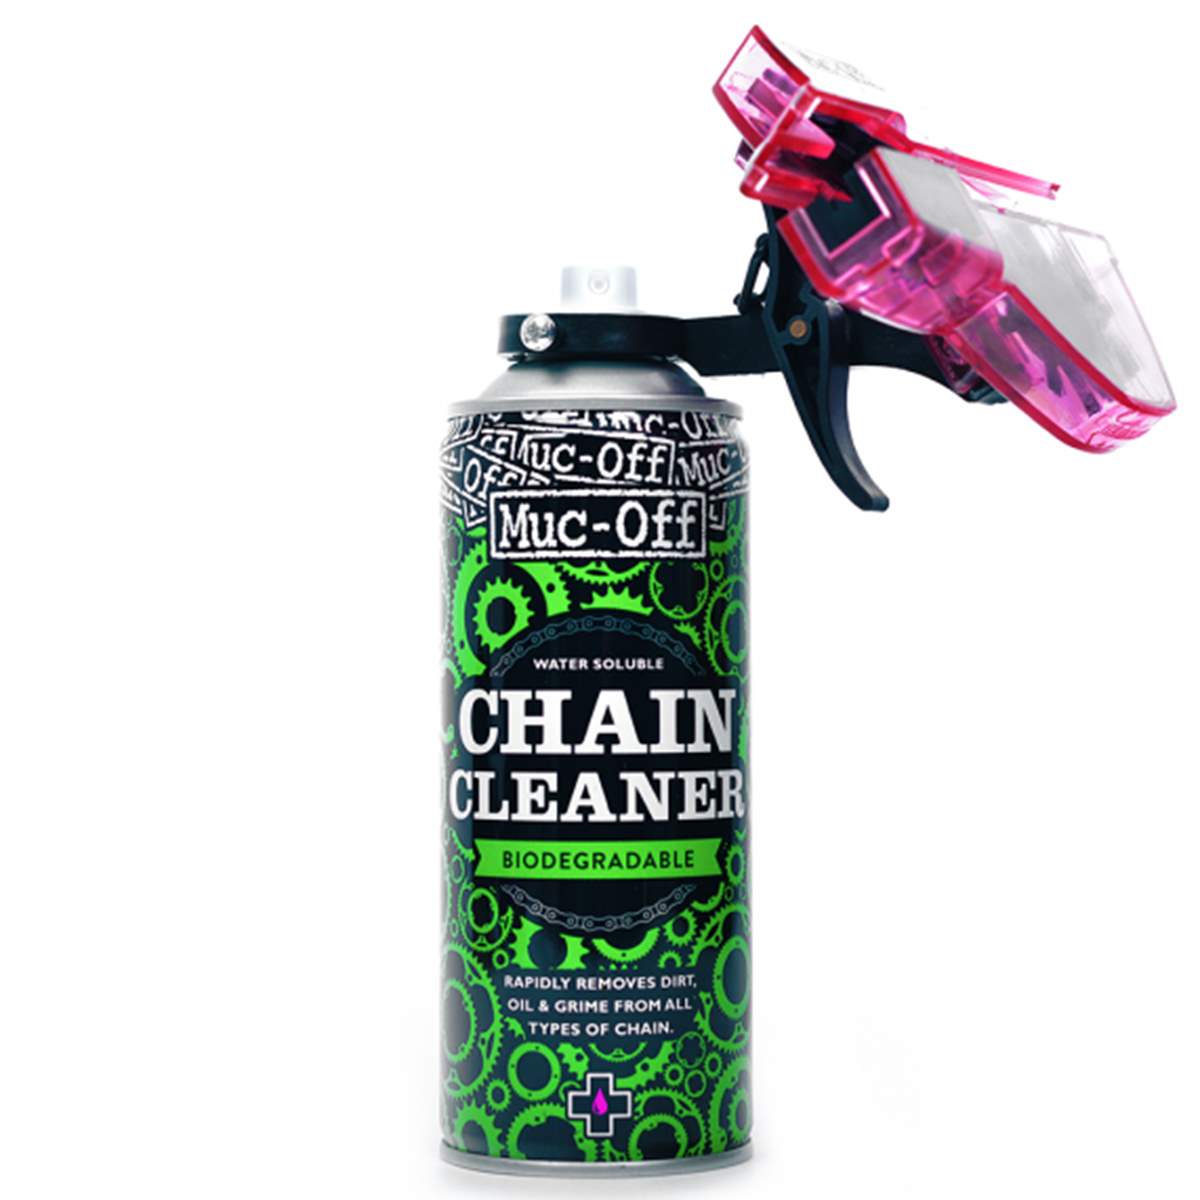 Muc-Off Chain Cleaning Device Chain Doc with Chain Cleaner Liquid, 400 ml